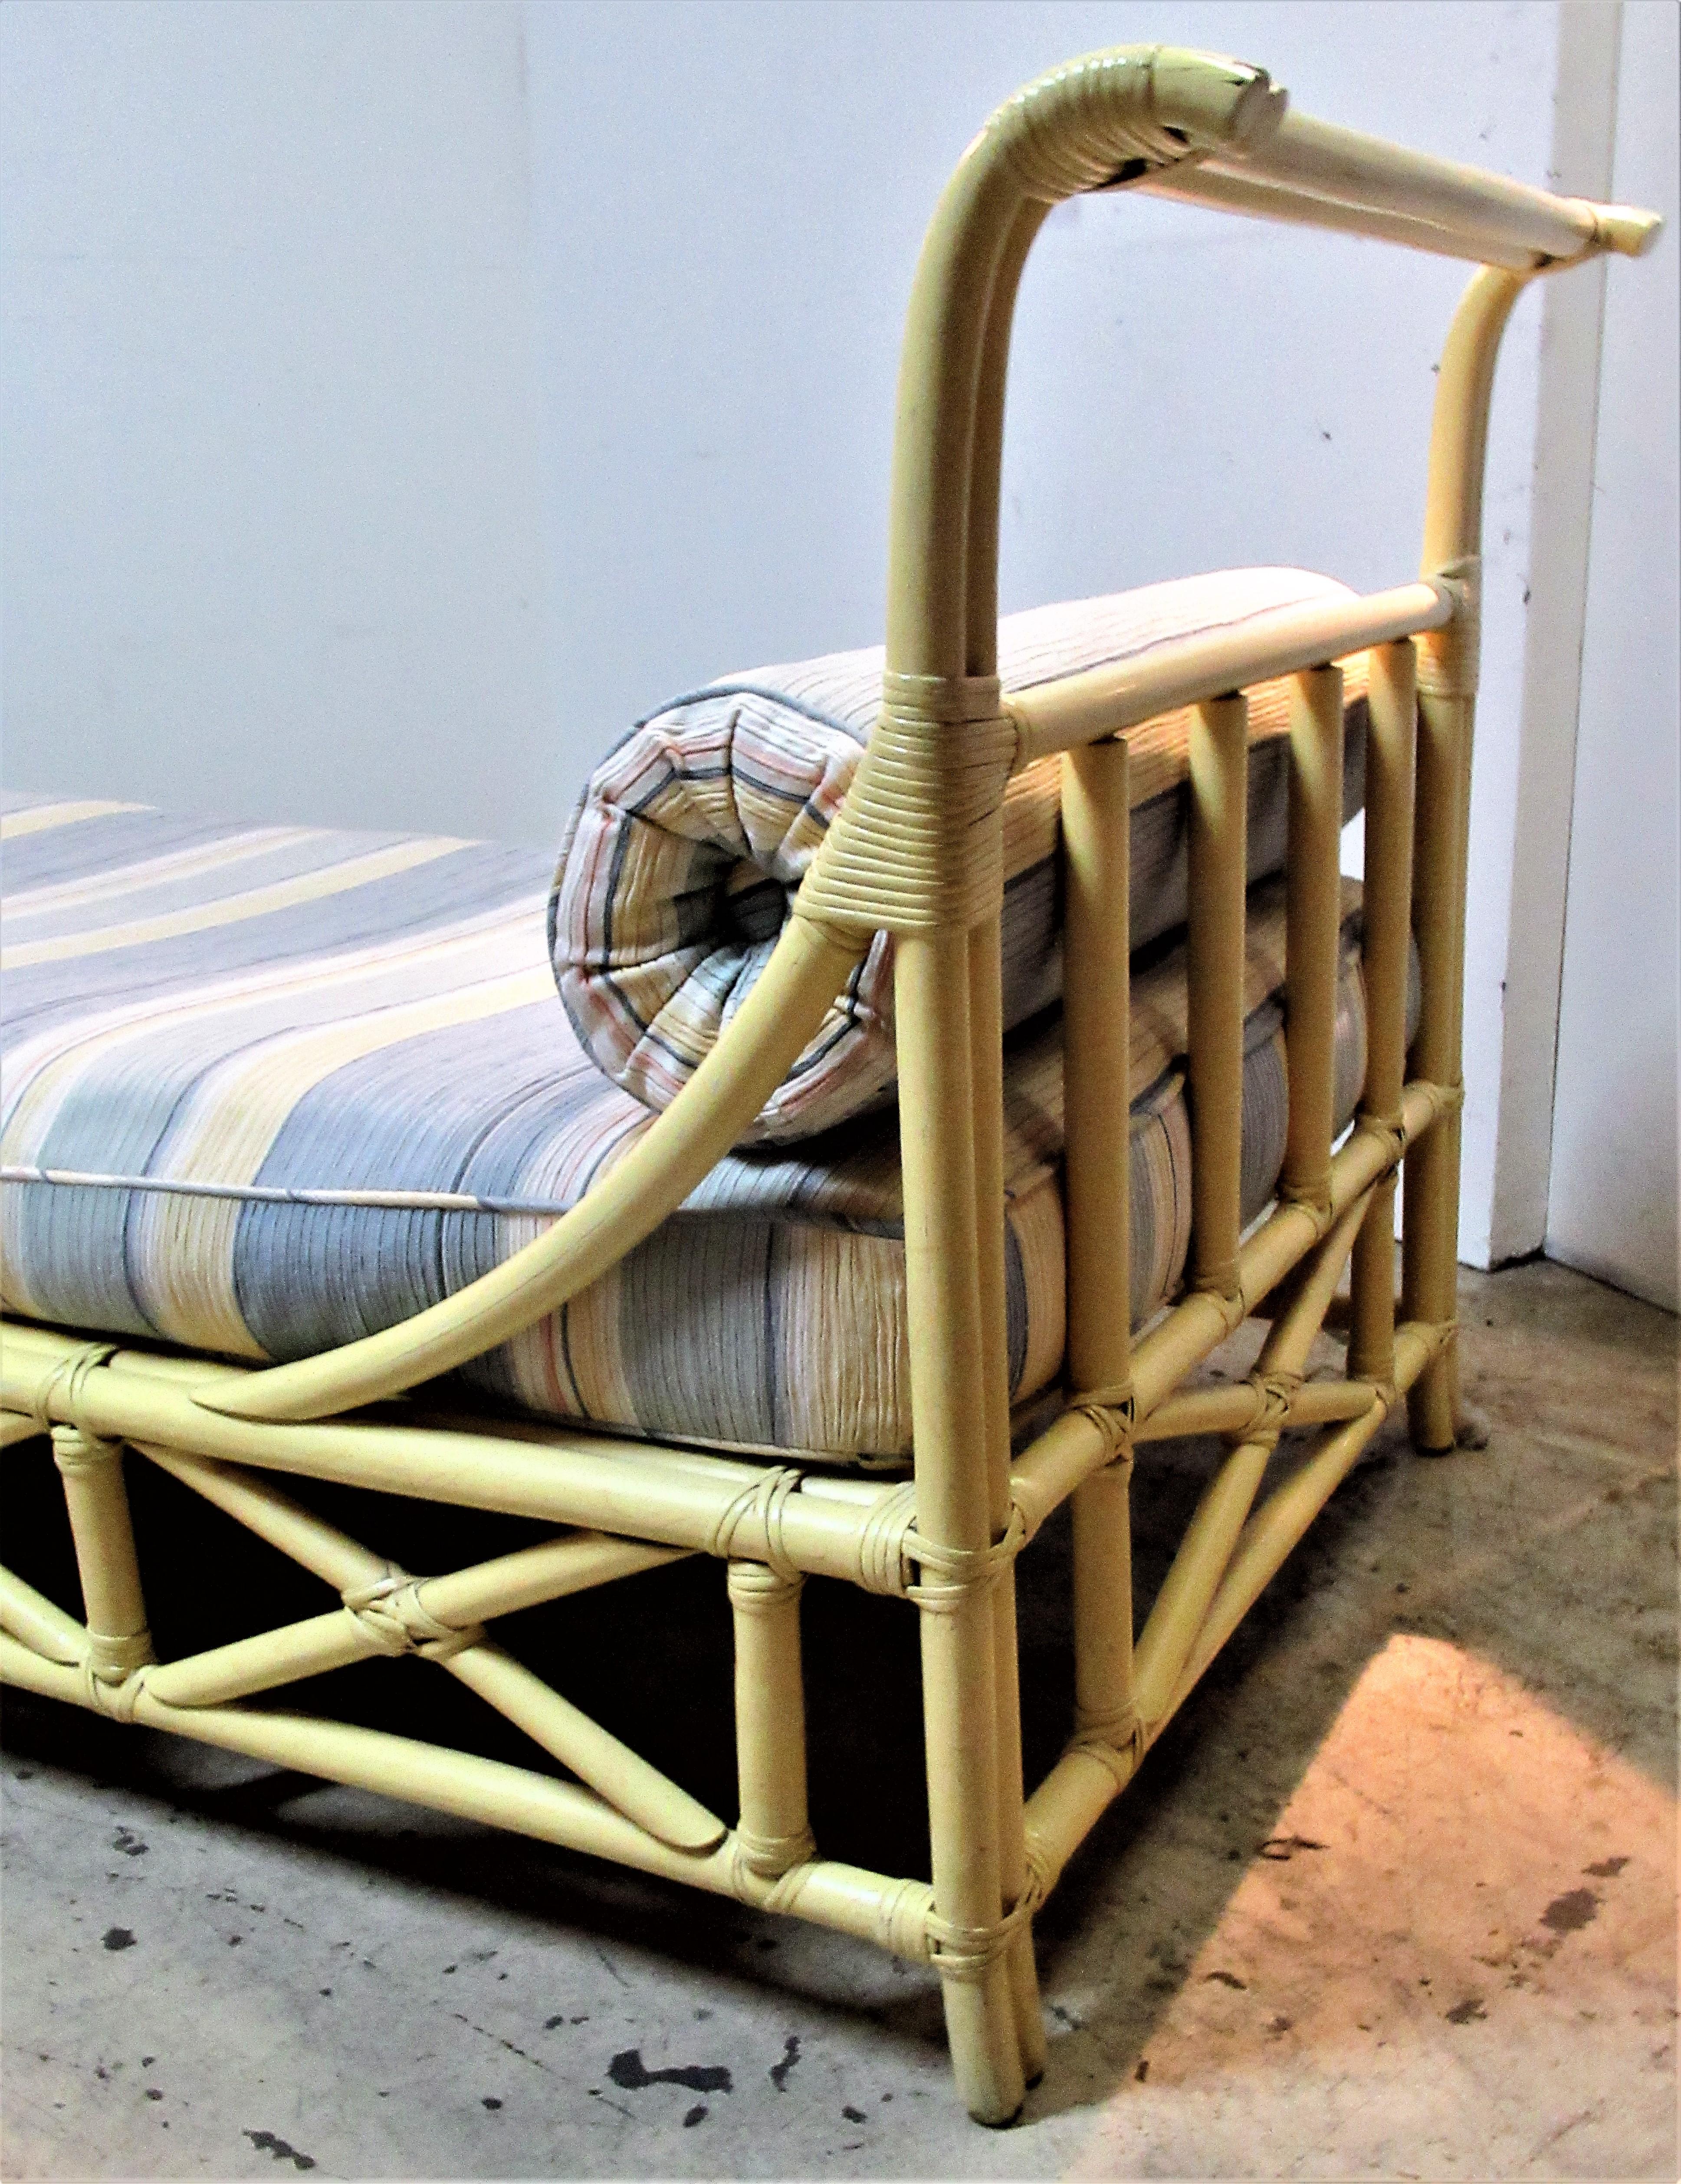 Old soft yellow painted rattan daybed lounge by Ficks Reed (see picture 10 of Ficks Reed silver foil label and picture 9 of original straps) with beautifully upholstered striped ribbed cotton long seat and bolster cushions. Great form, circa 1960.